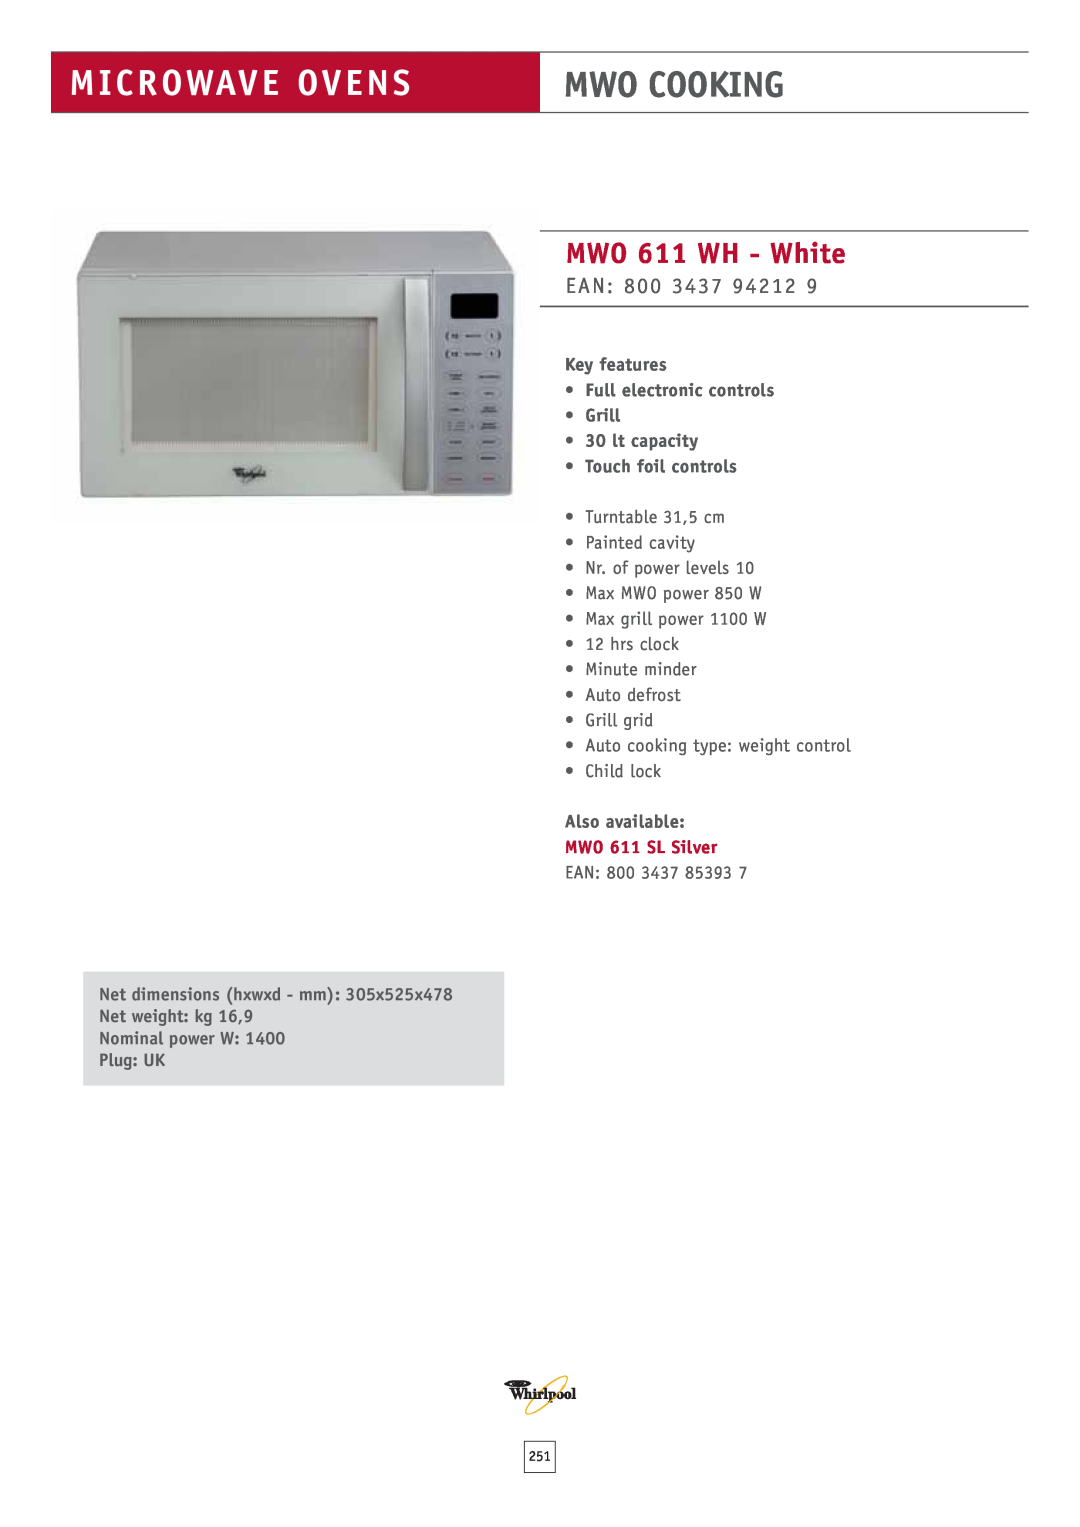 Whirlpool dimensions Microwave Ovens, Mwo Cooking, MWO 611 WH - White, Ean, Key features Full electronic controls Grill 